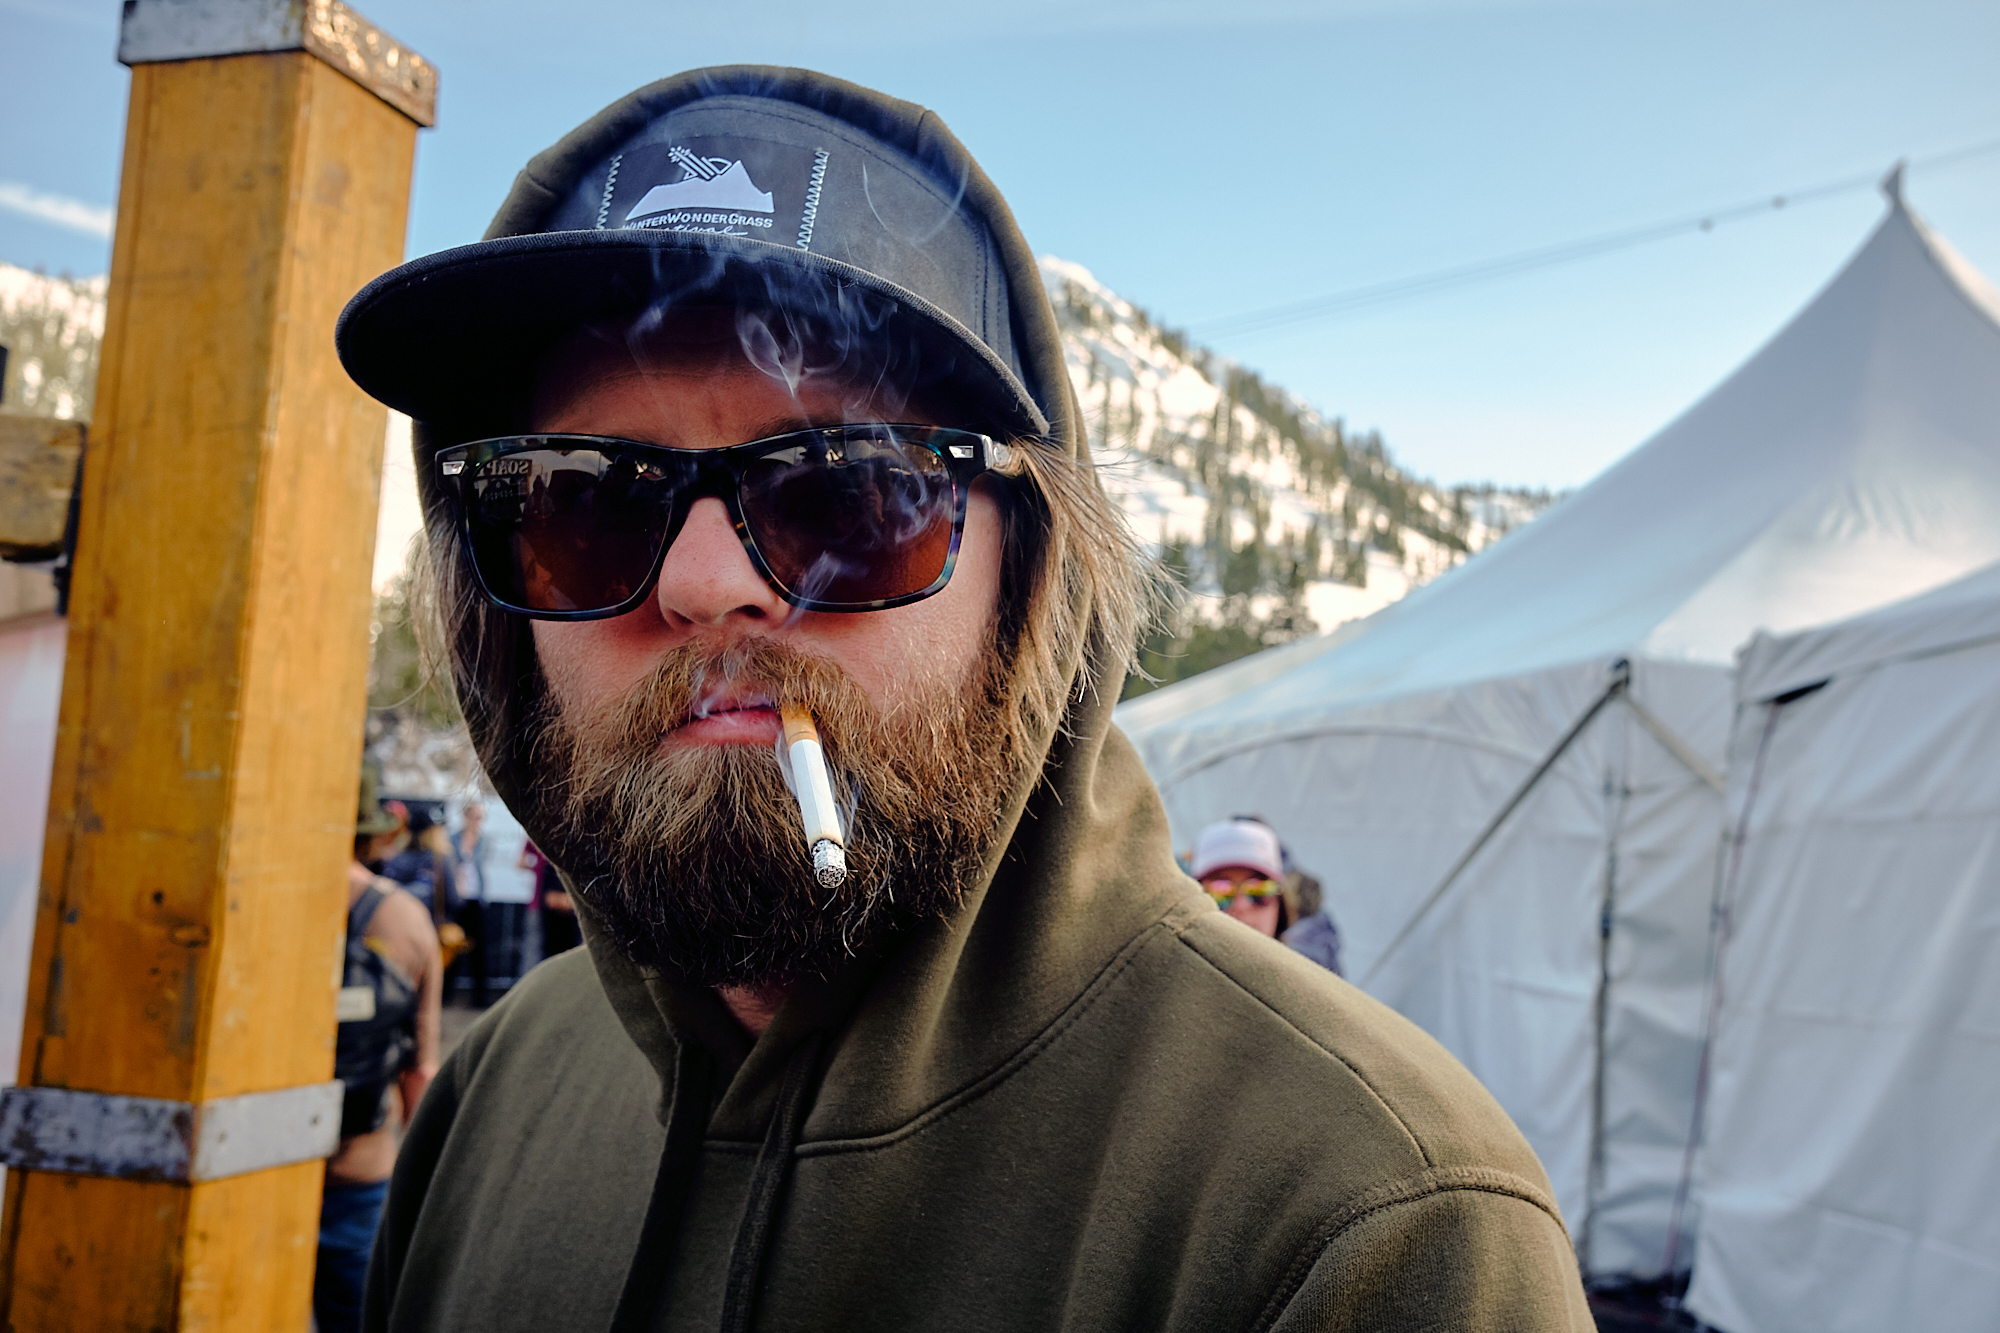  Jay enthusiastically smokes a cigarette at Winter Wondergrass bluegrass festival. | Squaw Valley, CA 3/31/19 